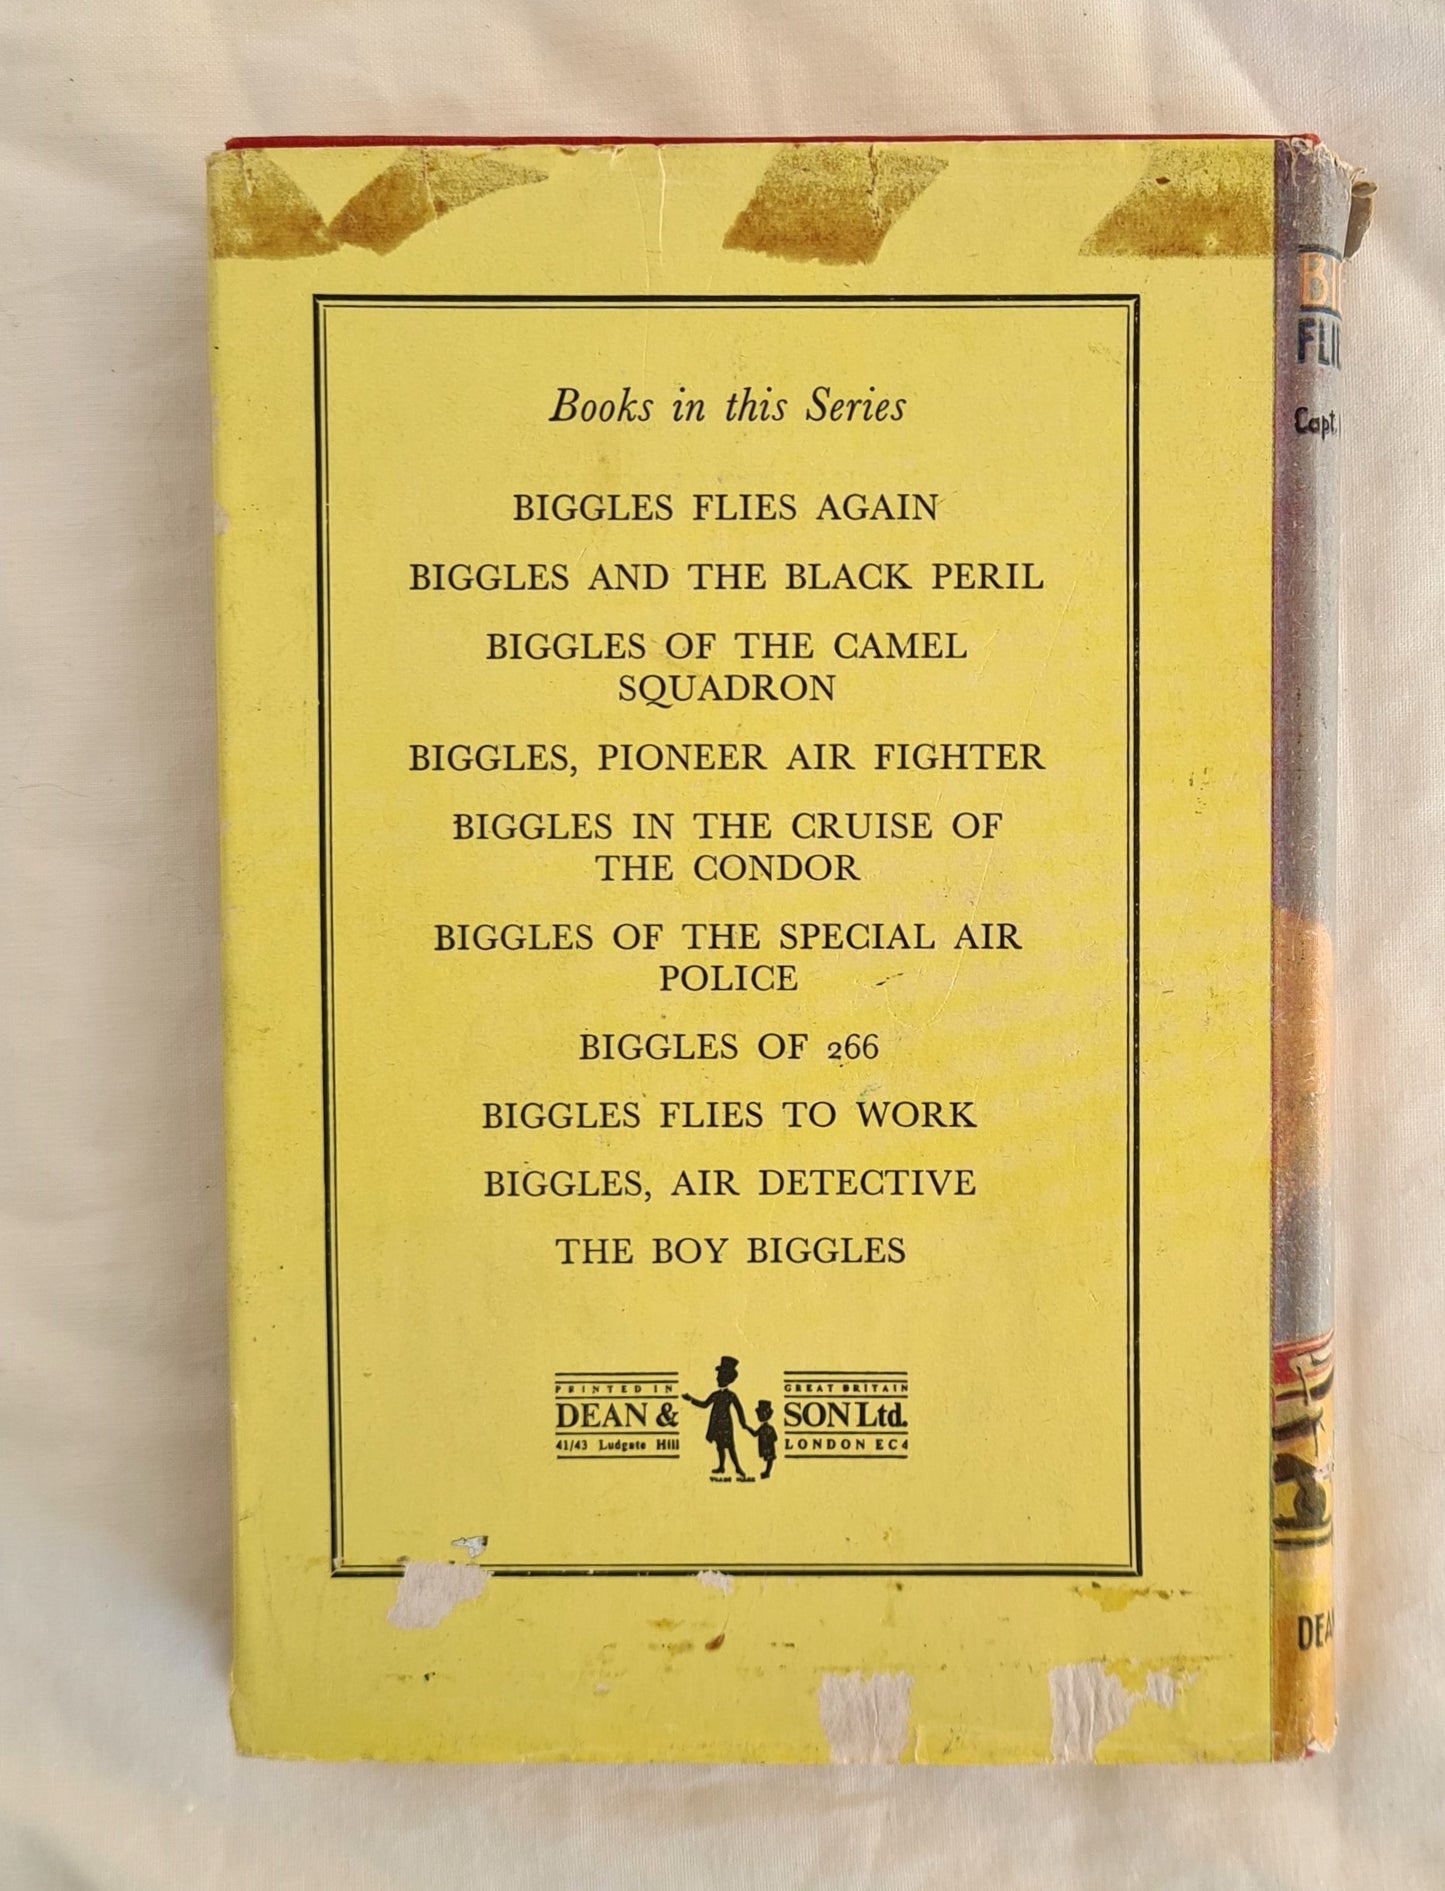 Biggles Flies to Work by Capt. W. E. Johns